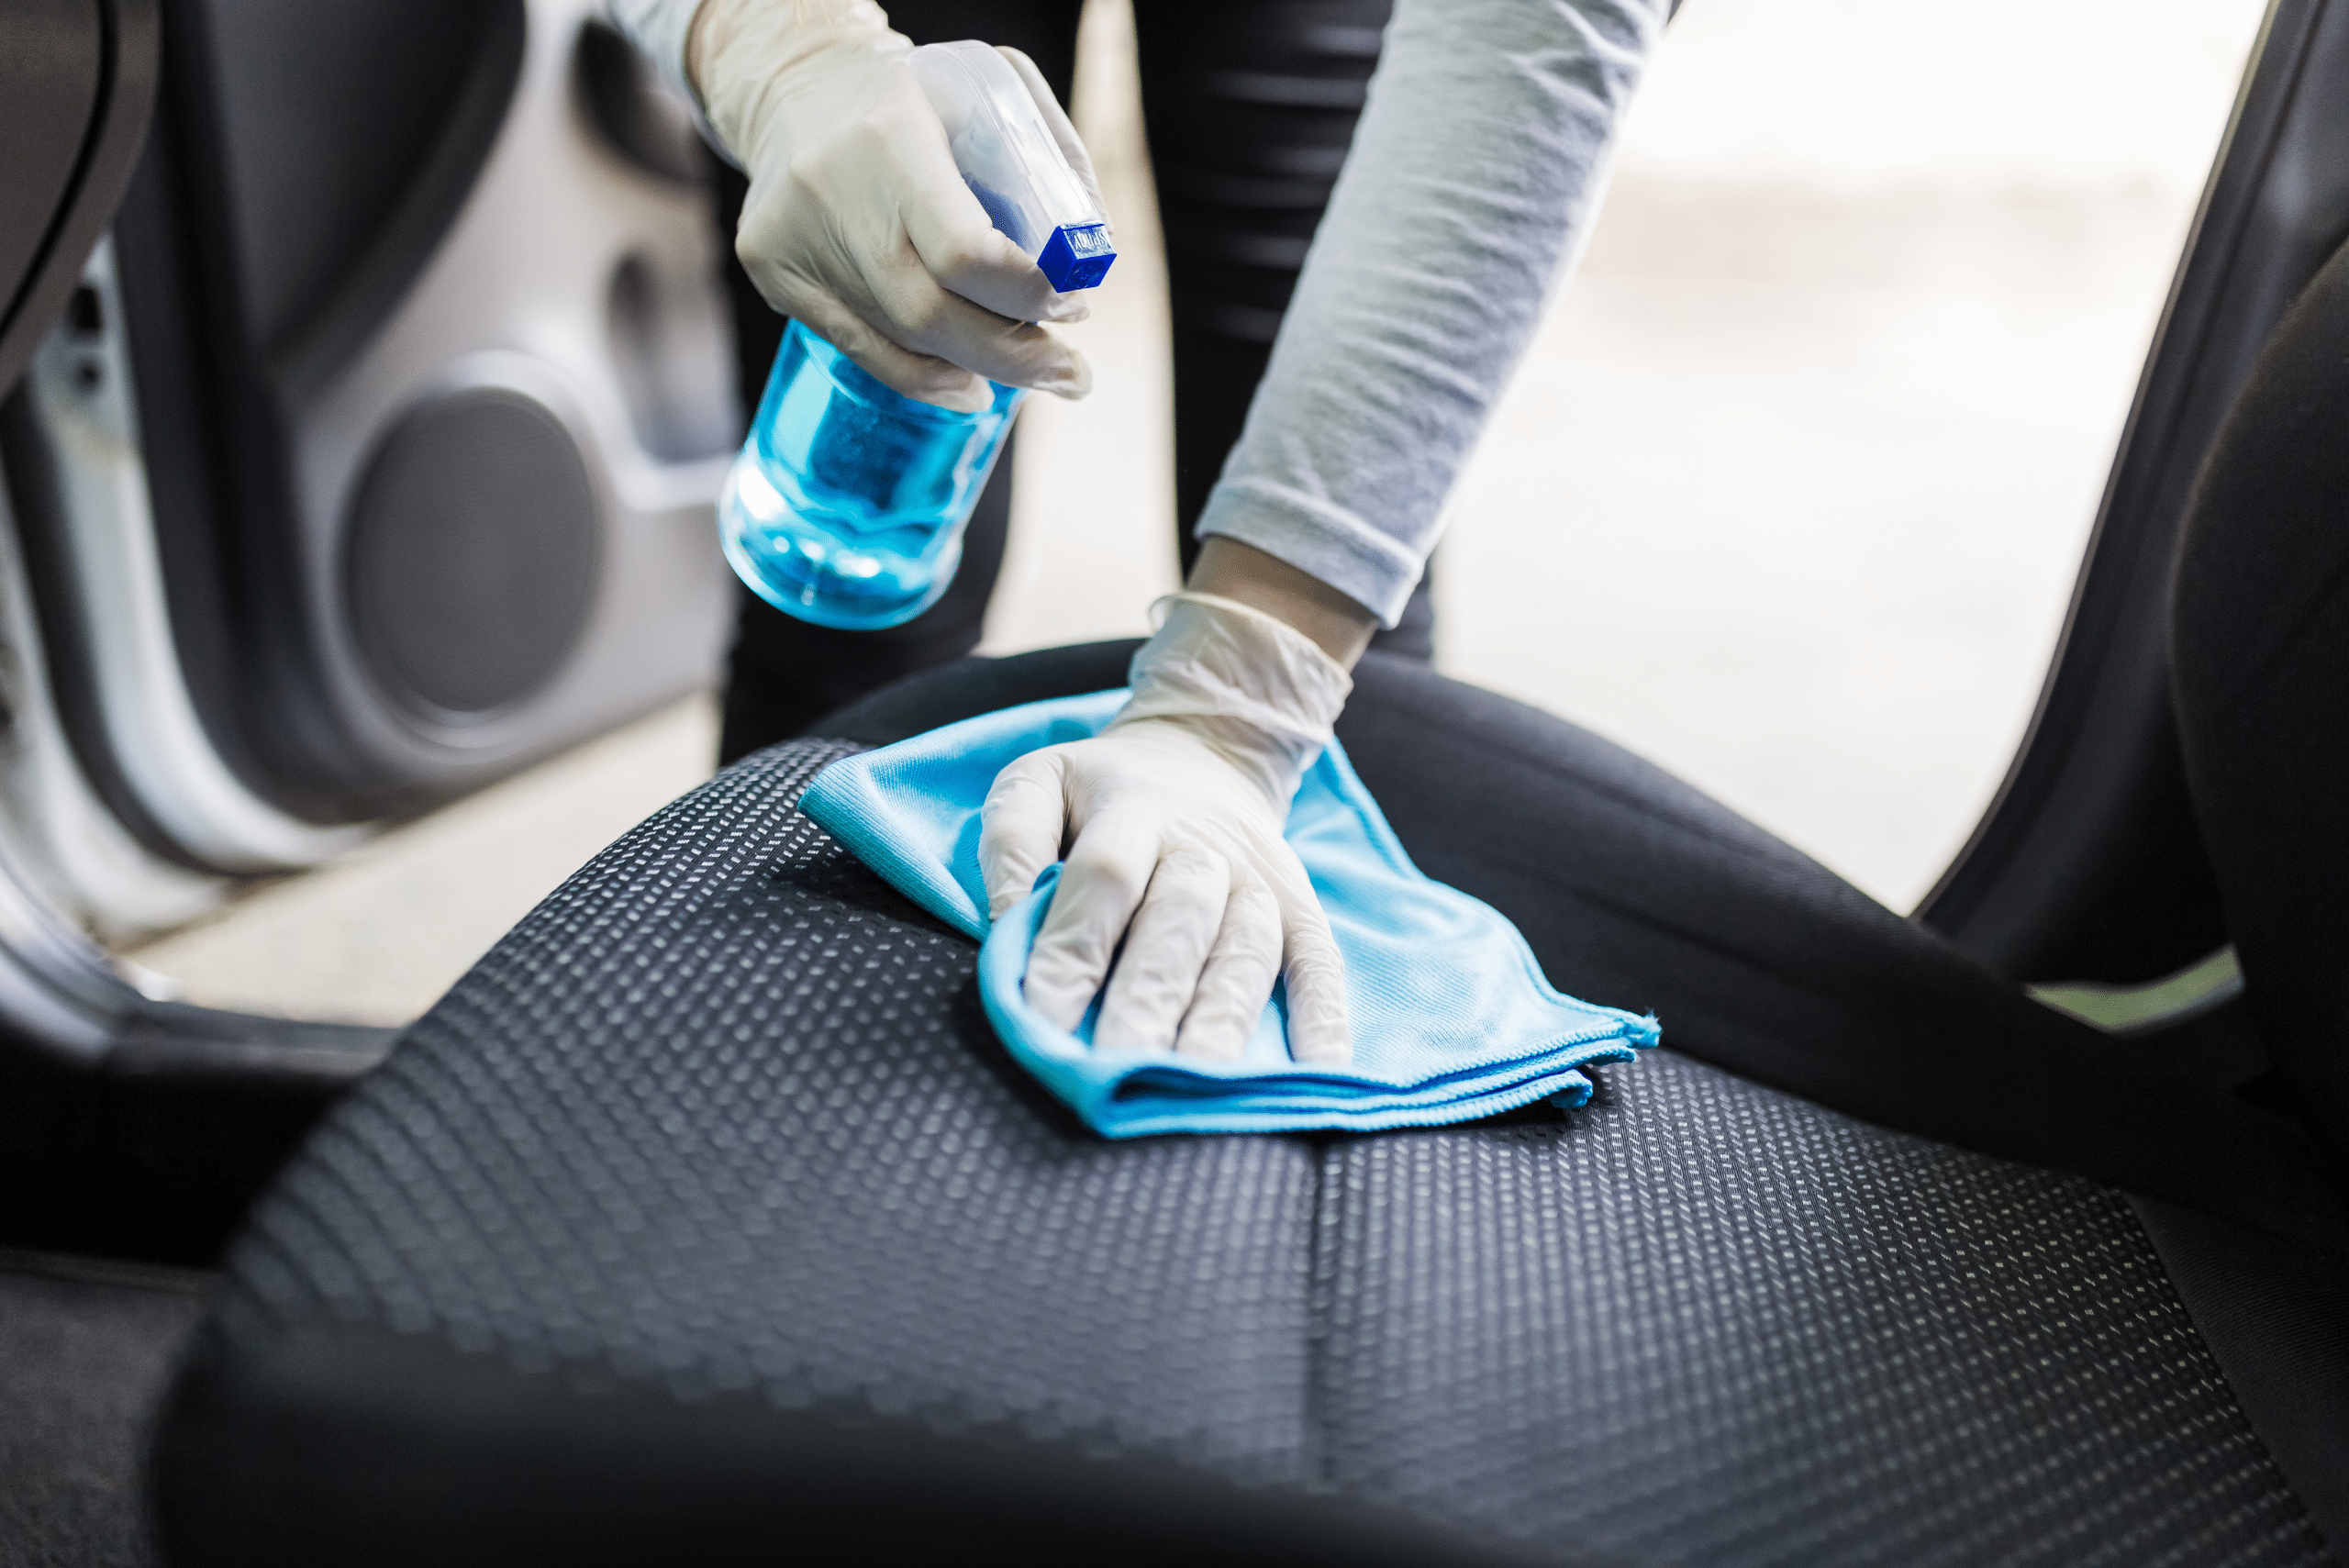 Step-by-Step Guide for Cleaning Cloth Car Seats - ManMadeDIY